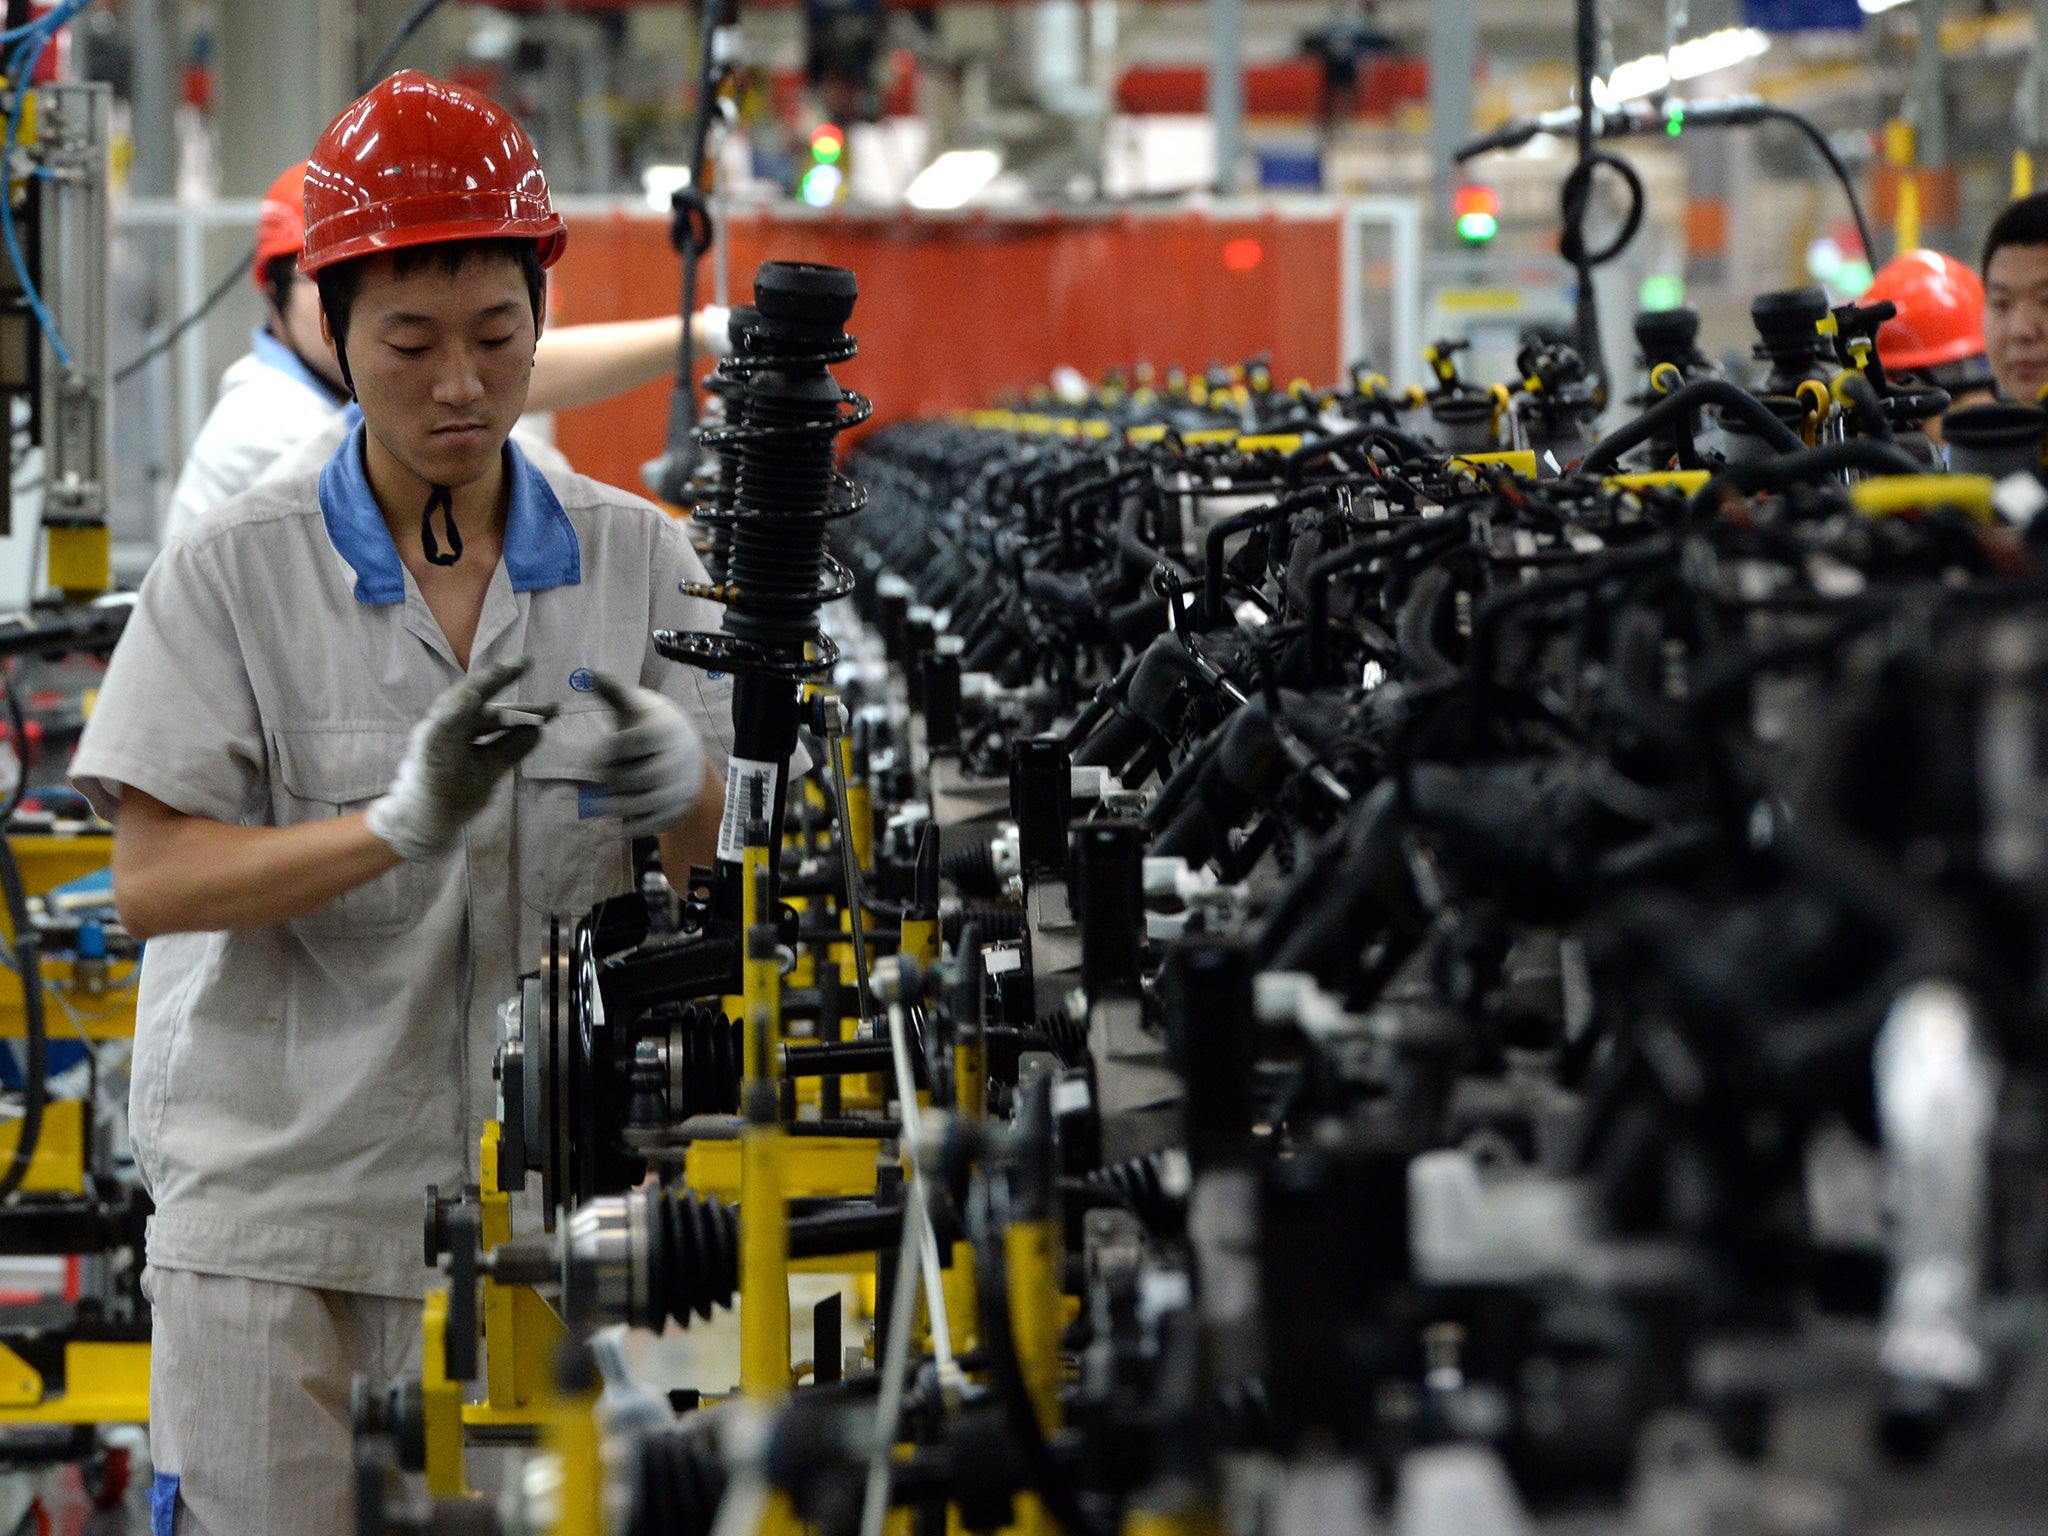 China’s manufacturing purchasing managers’ index came in at 50.1 for April